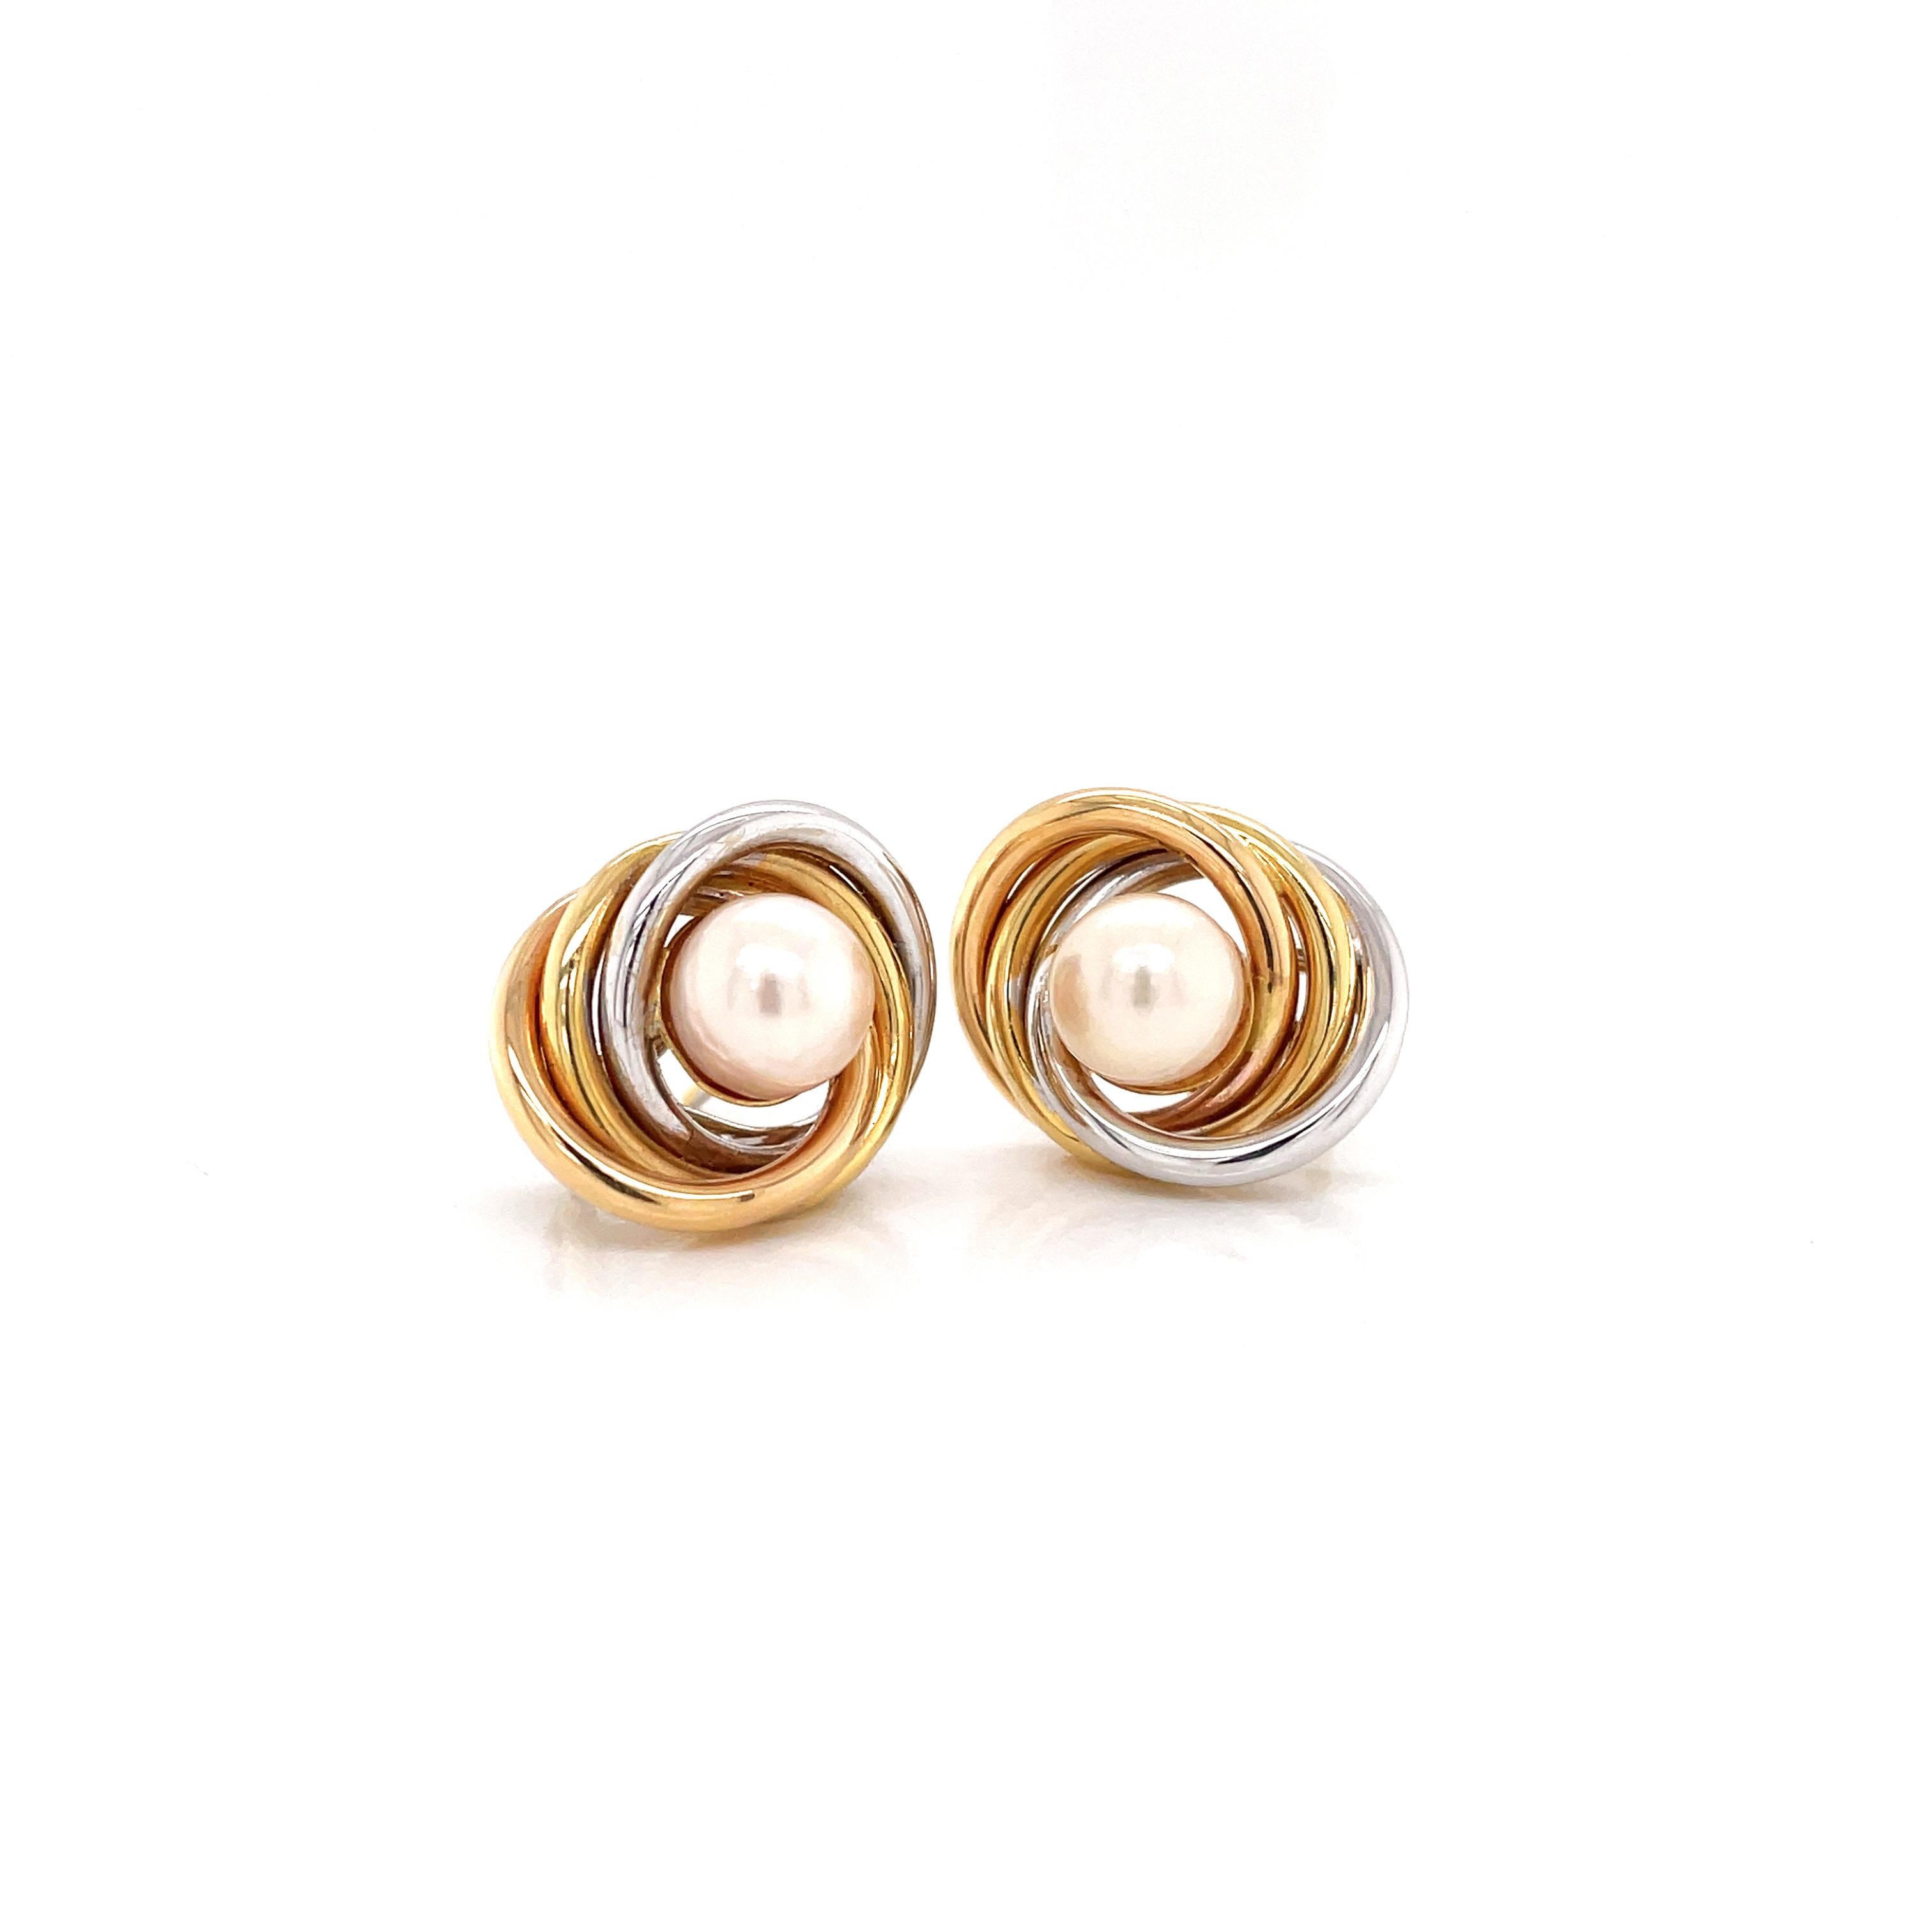 These gorgeous stud earrings feature a cultured pearl measuring 7mm set in the center of three 18 carat gold rings, one white, one rose and one yellow intertwined beautifully creating a solid frame. The earrings are finished with a secure French